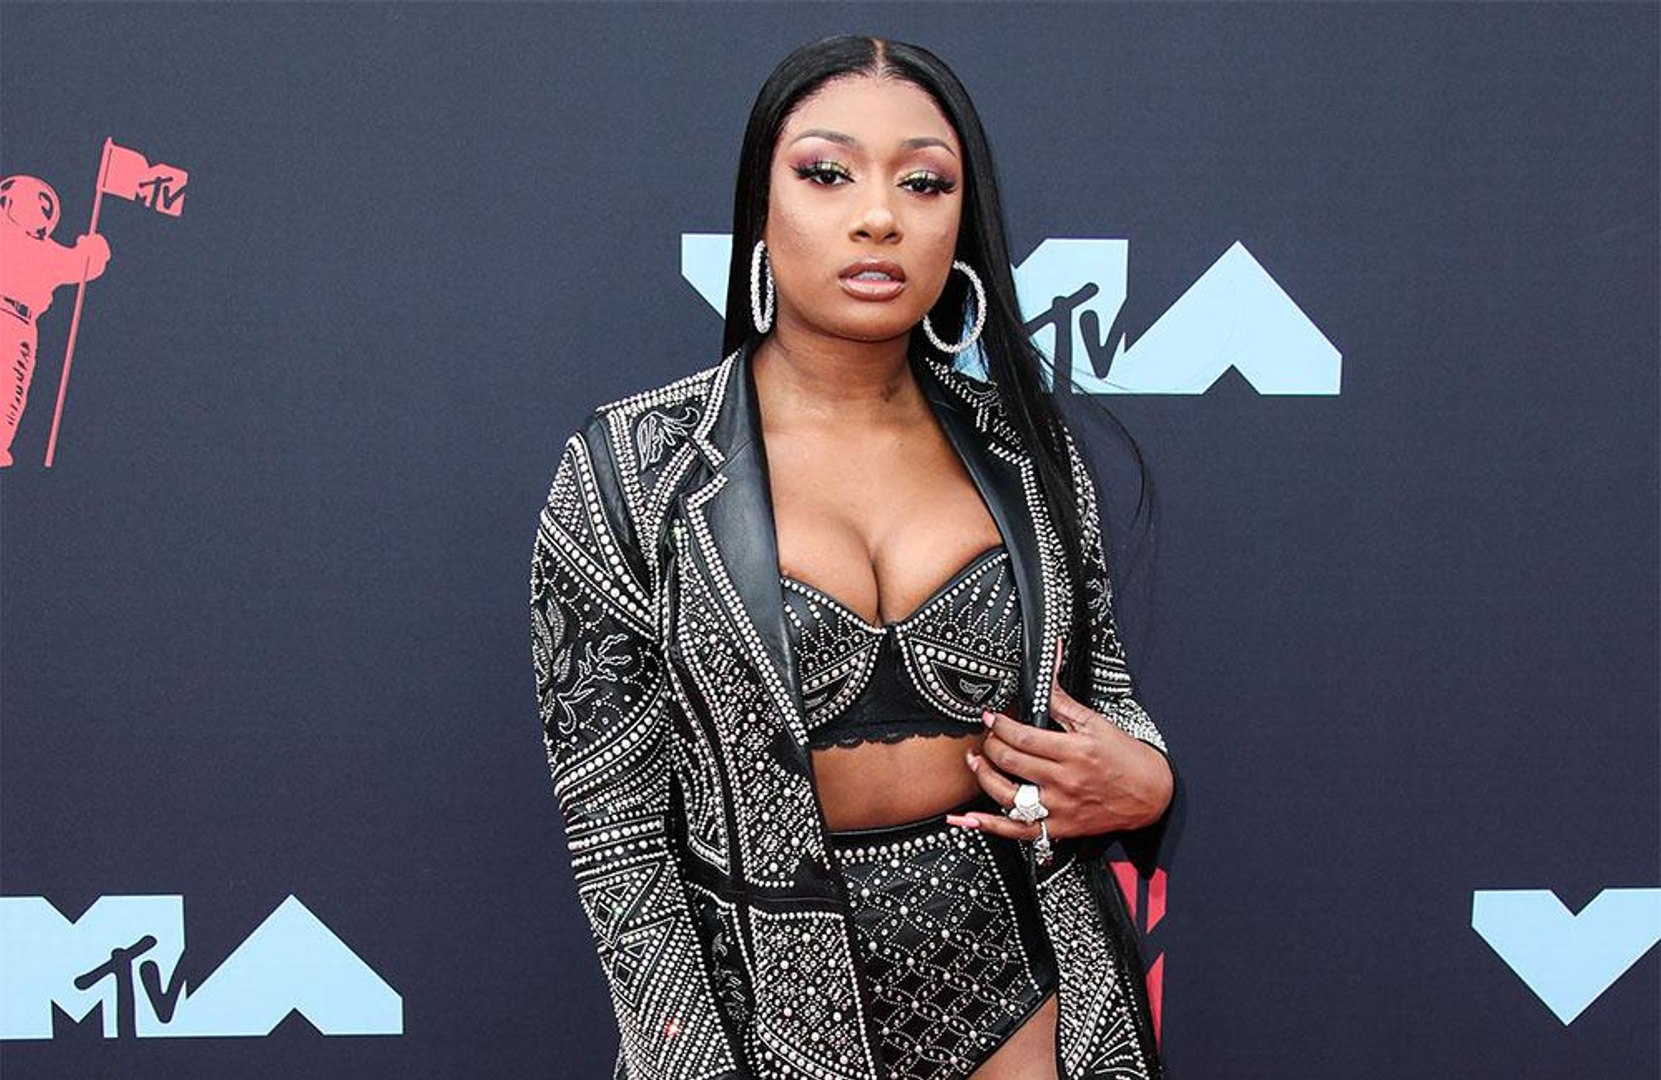 ⁣'I'ma twerk, and it's gon' look this way': Megan Thee Stallion doesn't